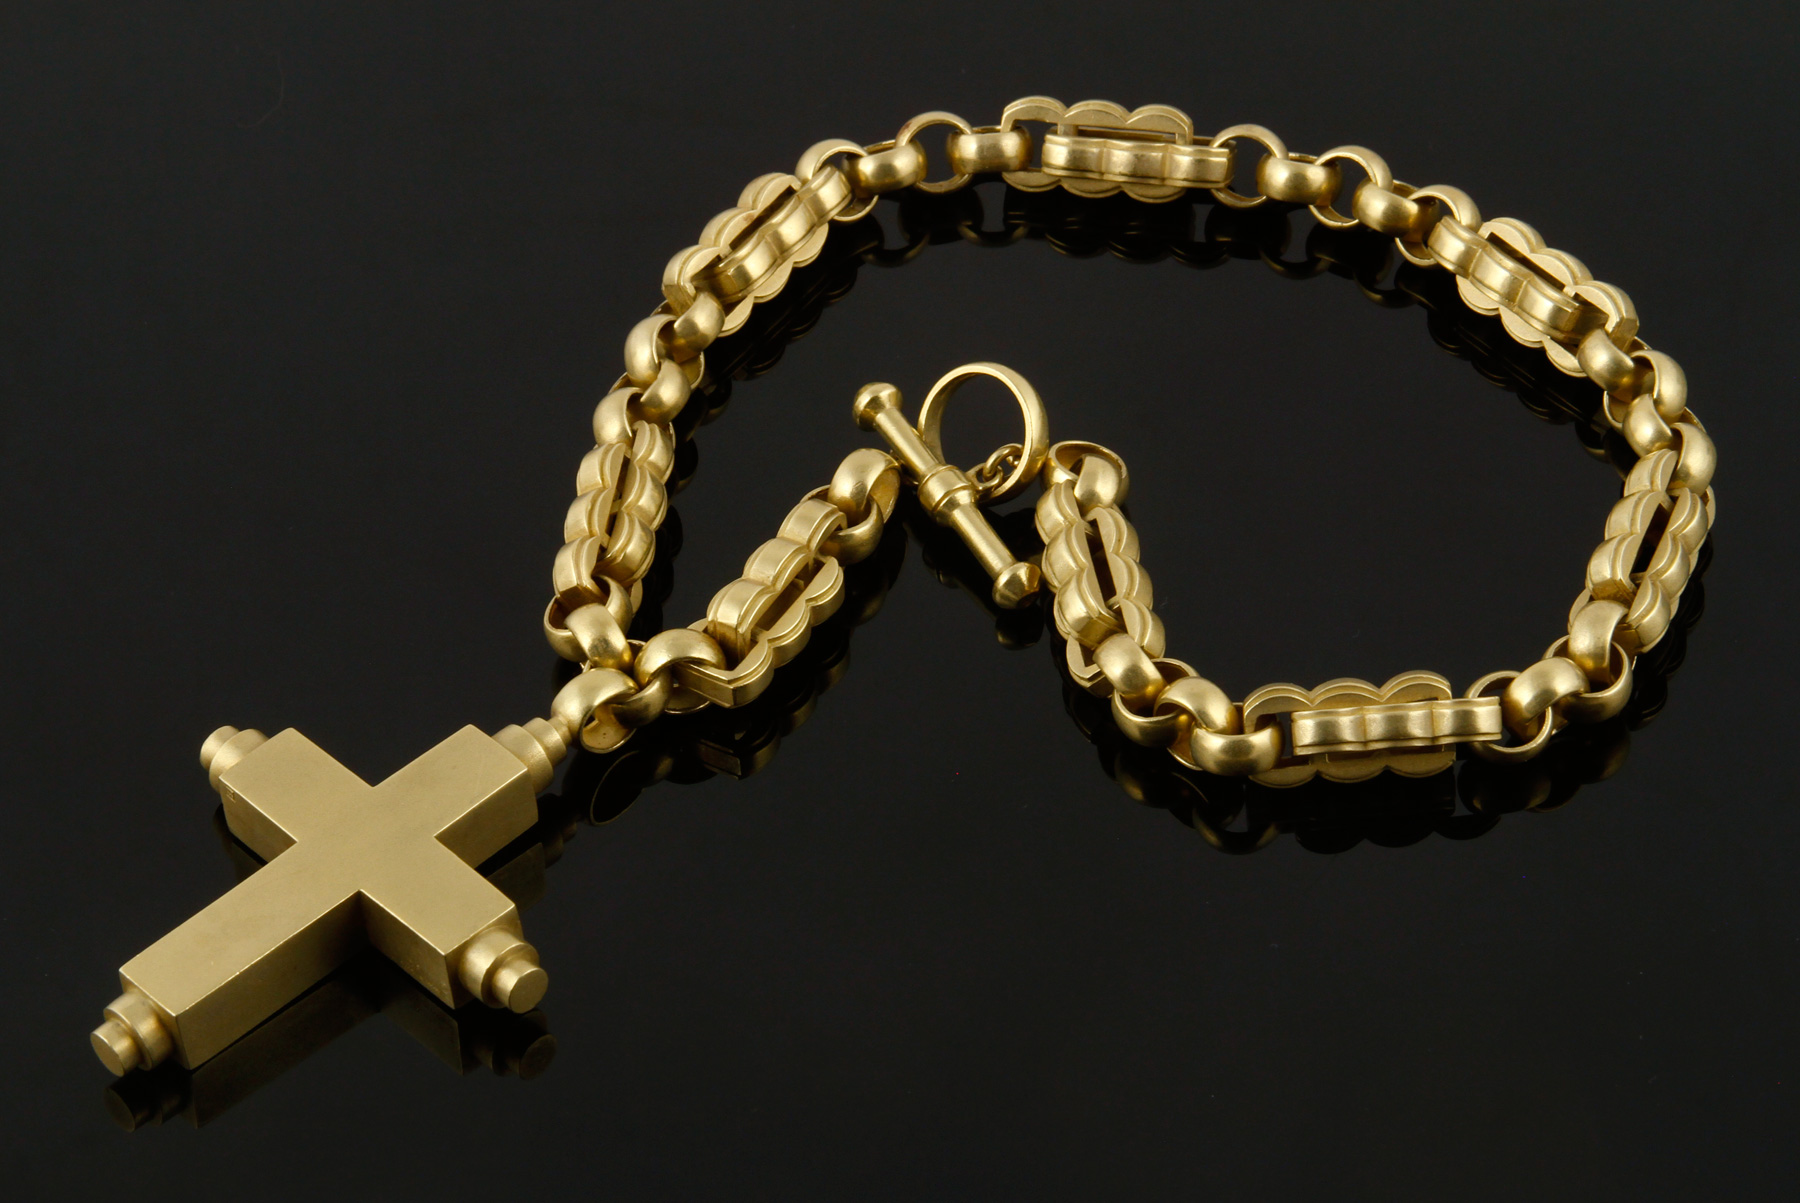 Barry Kieselstein-Cord 18K gold necklace with cross pendant, matte finish, dated 1988